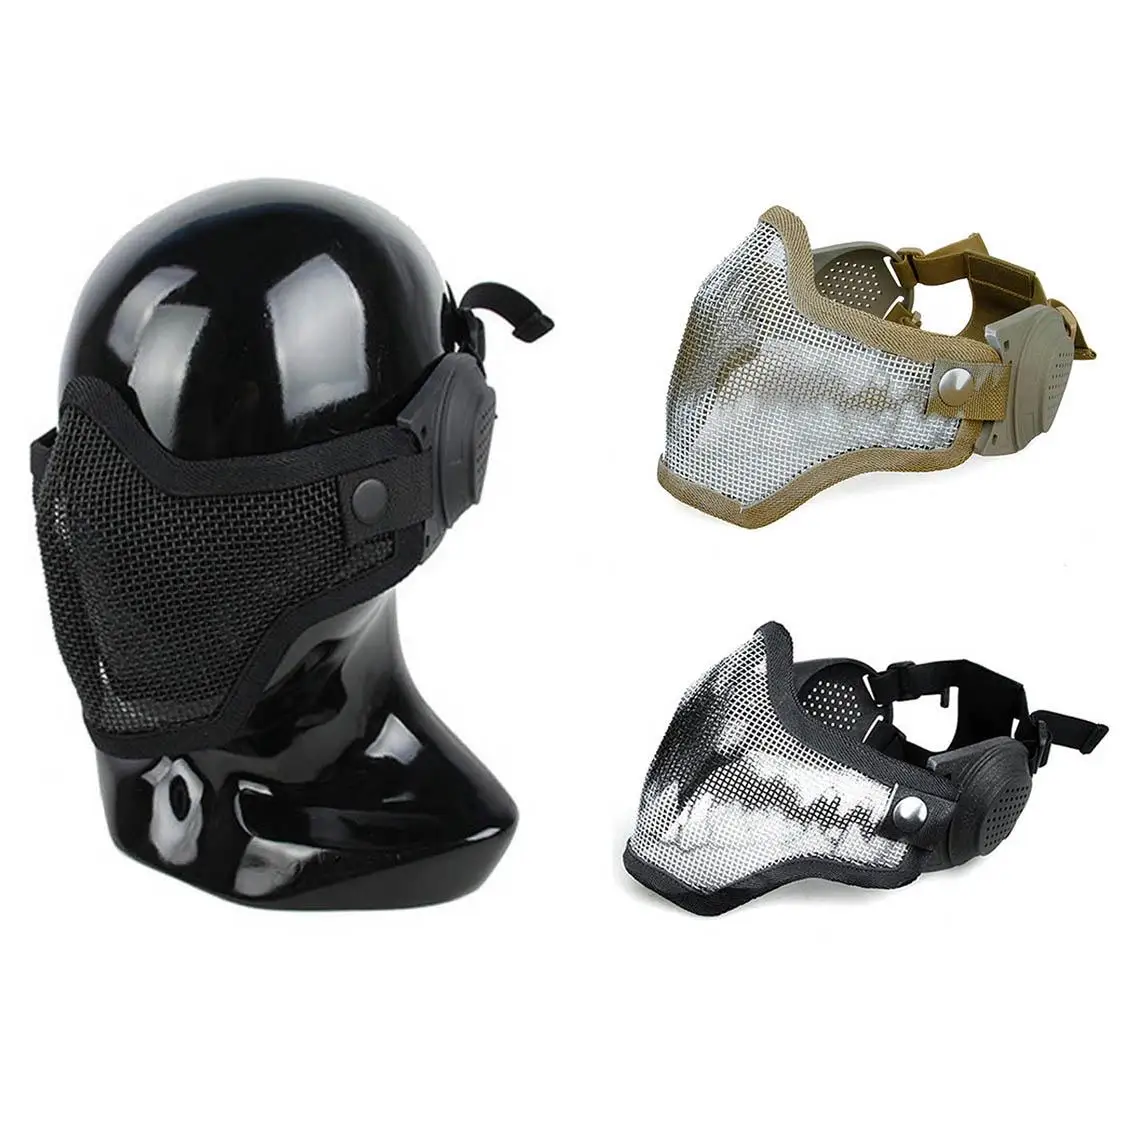 

BK KK TMC Airsoft Paintball CS Game Camouflage Cover Tactical Wire Mesh Half Face Cover with Ear Protection